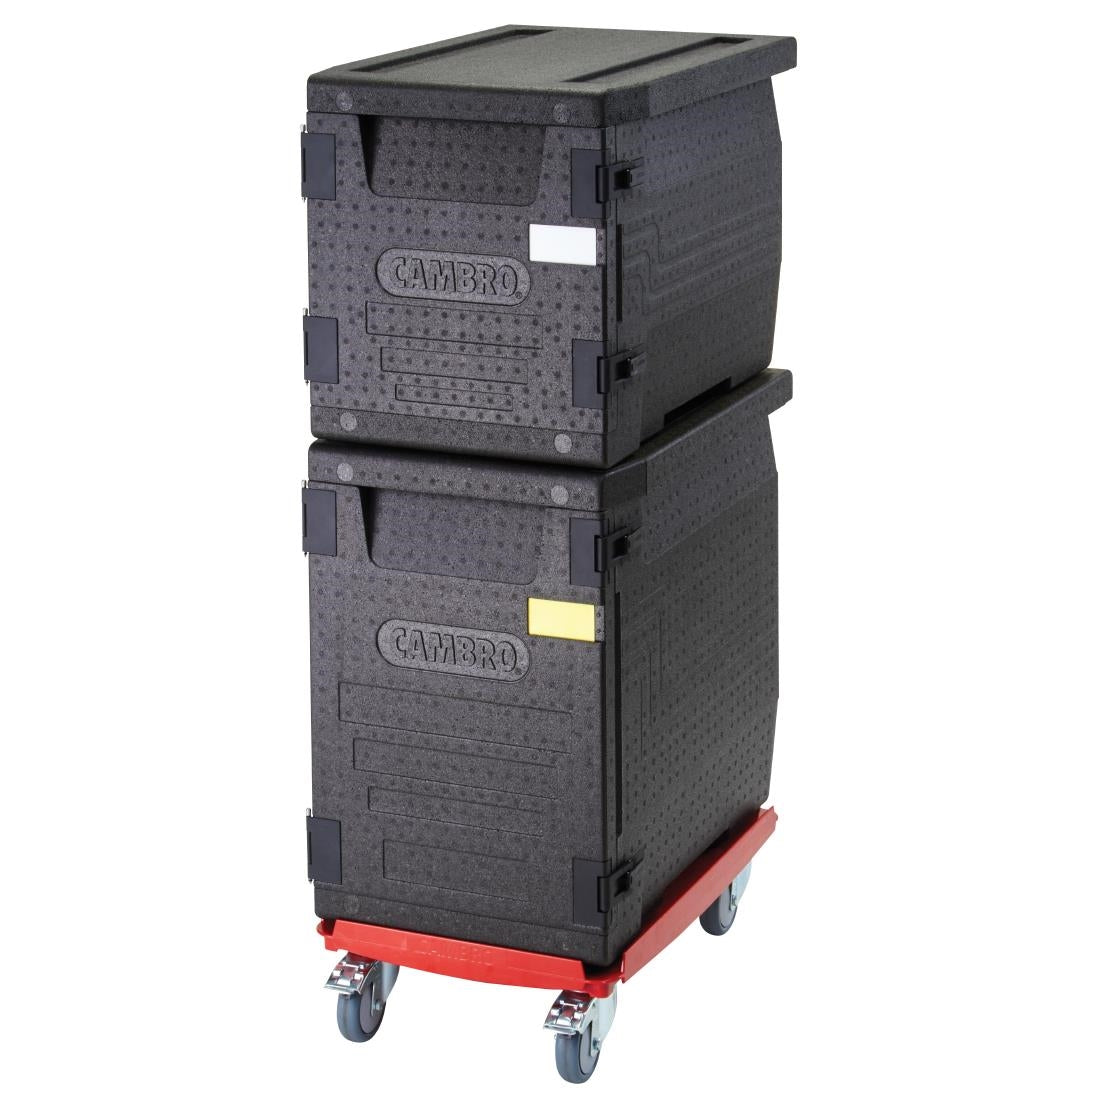 Cambro Camdolly for GN 1/1 Front and Top Loading CamGo Boxes JD Catering Equipment Solutions Ltd